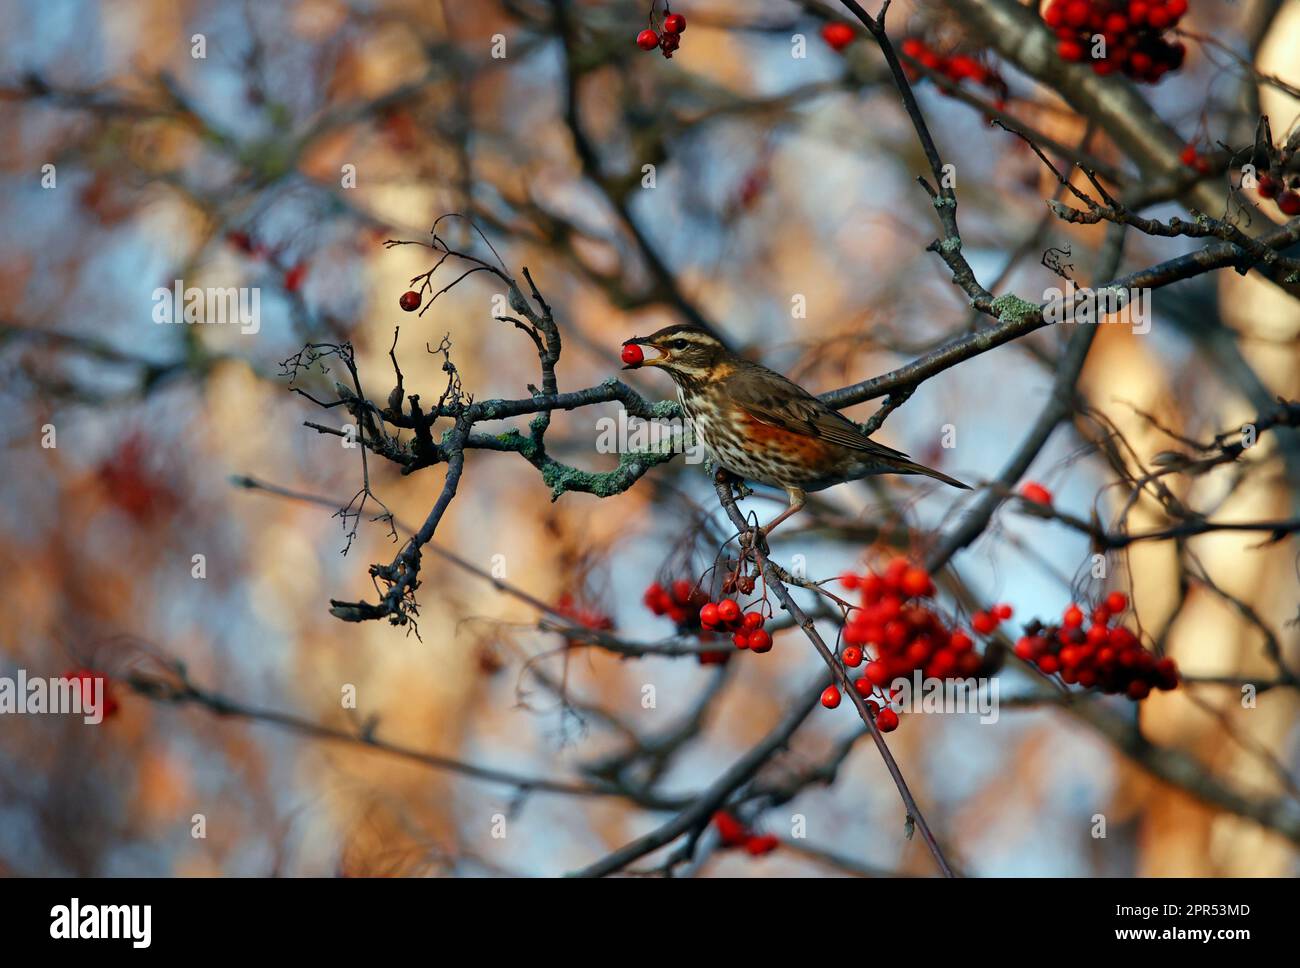 Redwings feasting on winter berries Stock Photo